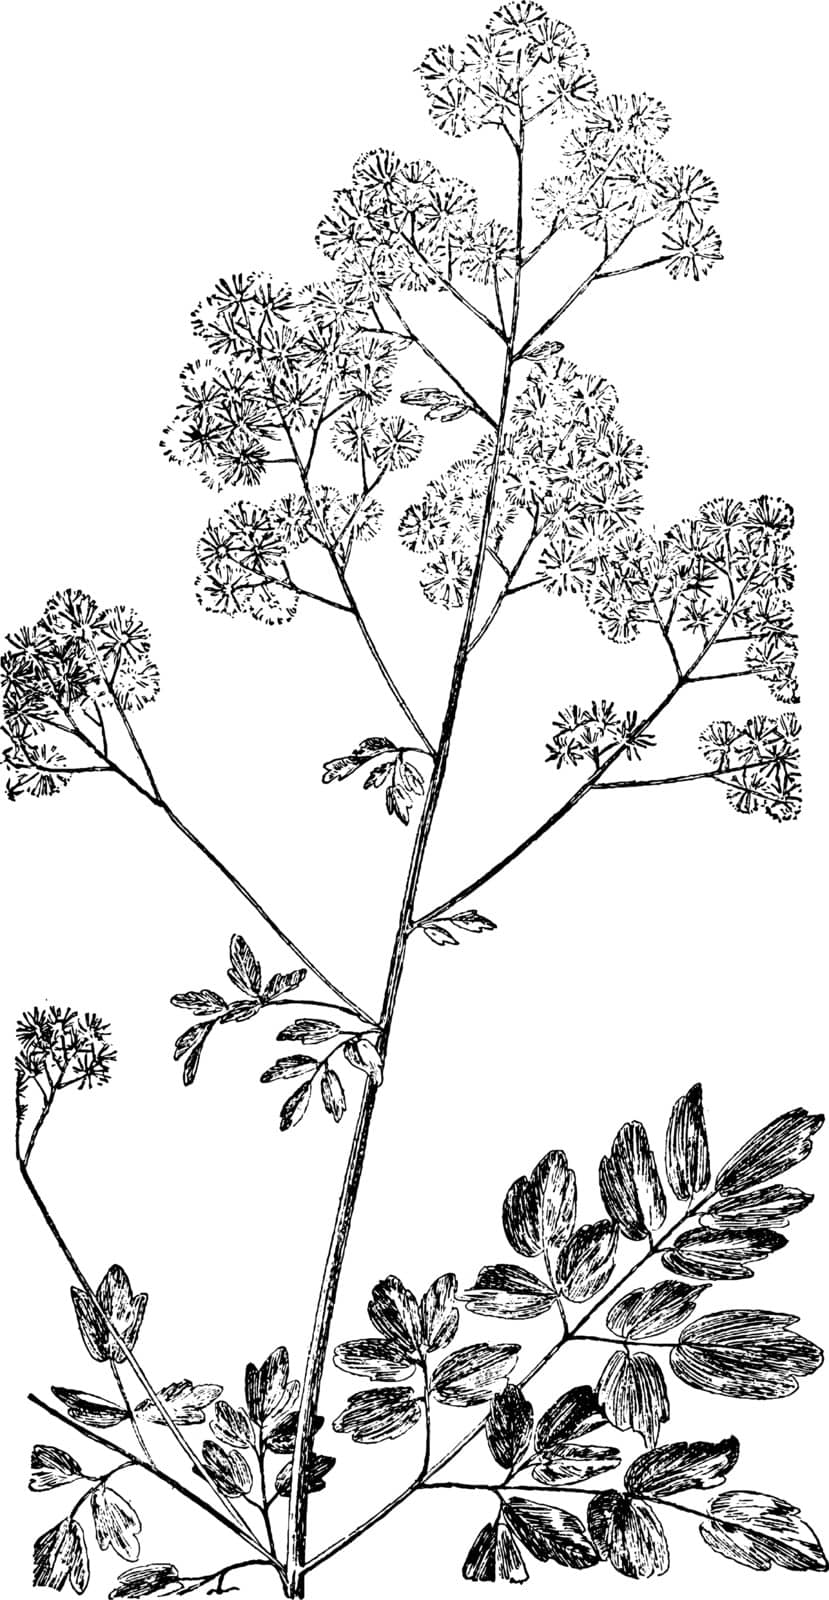 Thalictrum polygamum is an herbaceous perennial plant native to wet areas in eastern North America, vintage line drawing or engraving illustration.